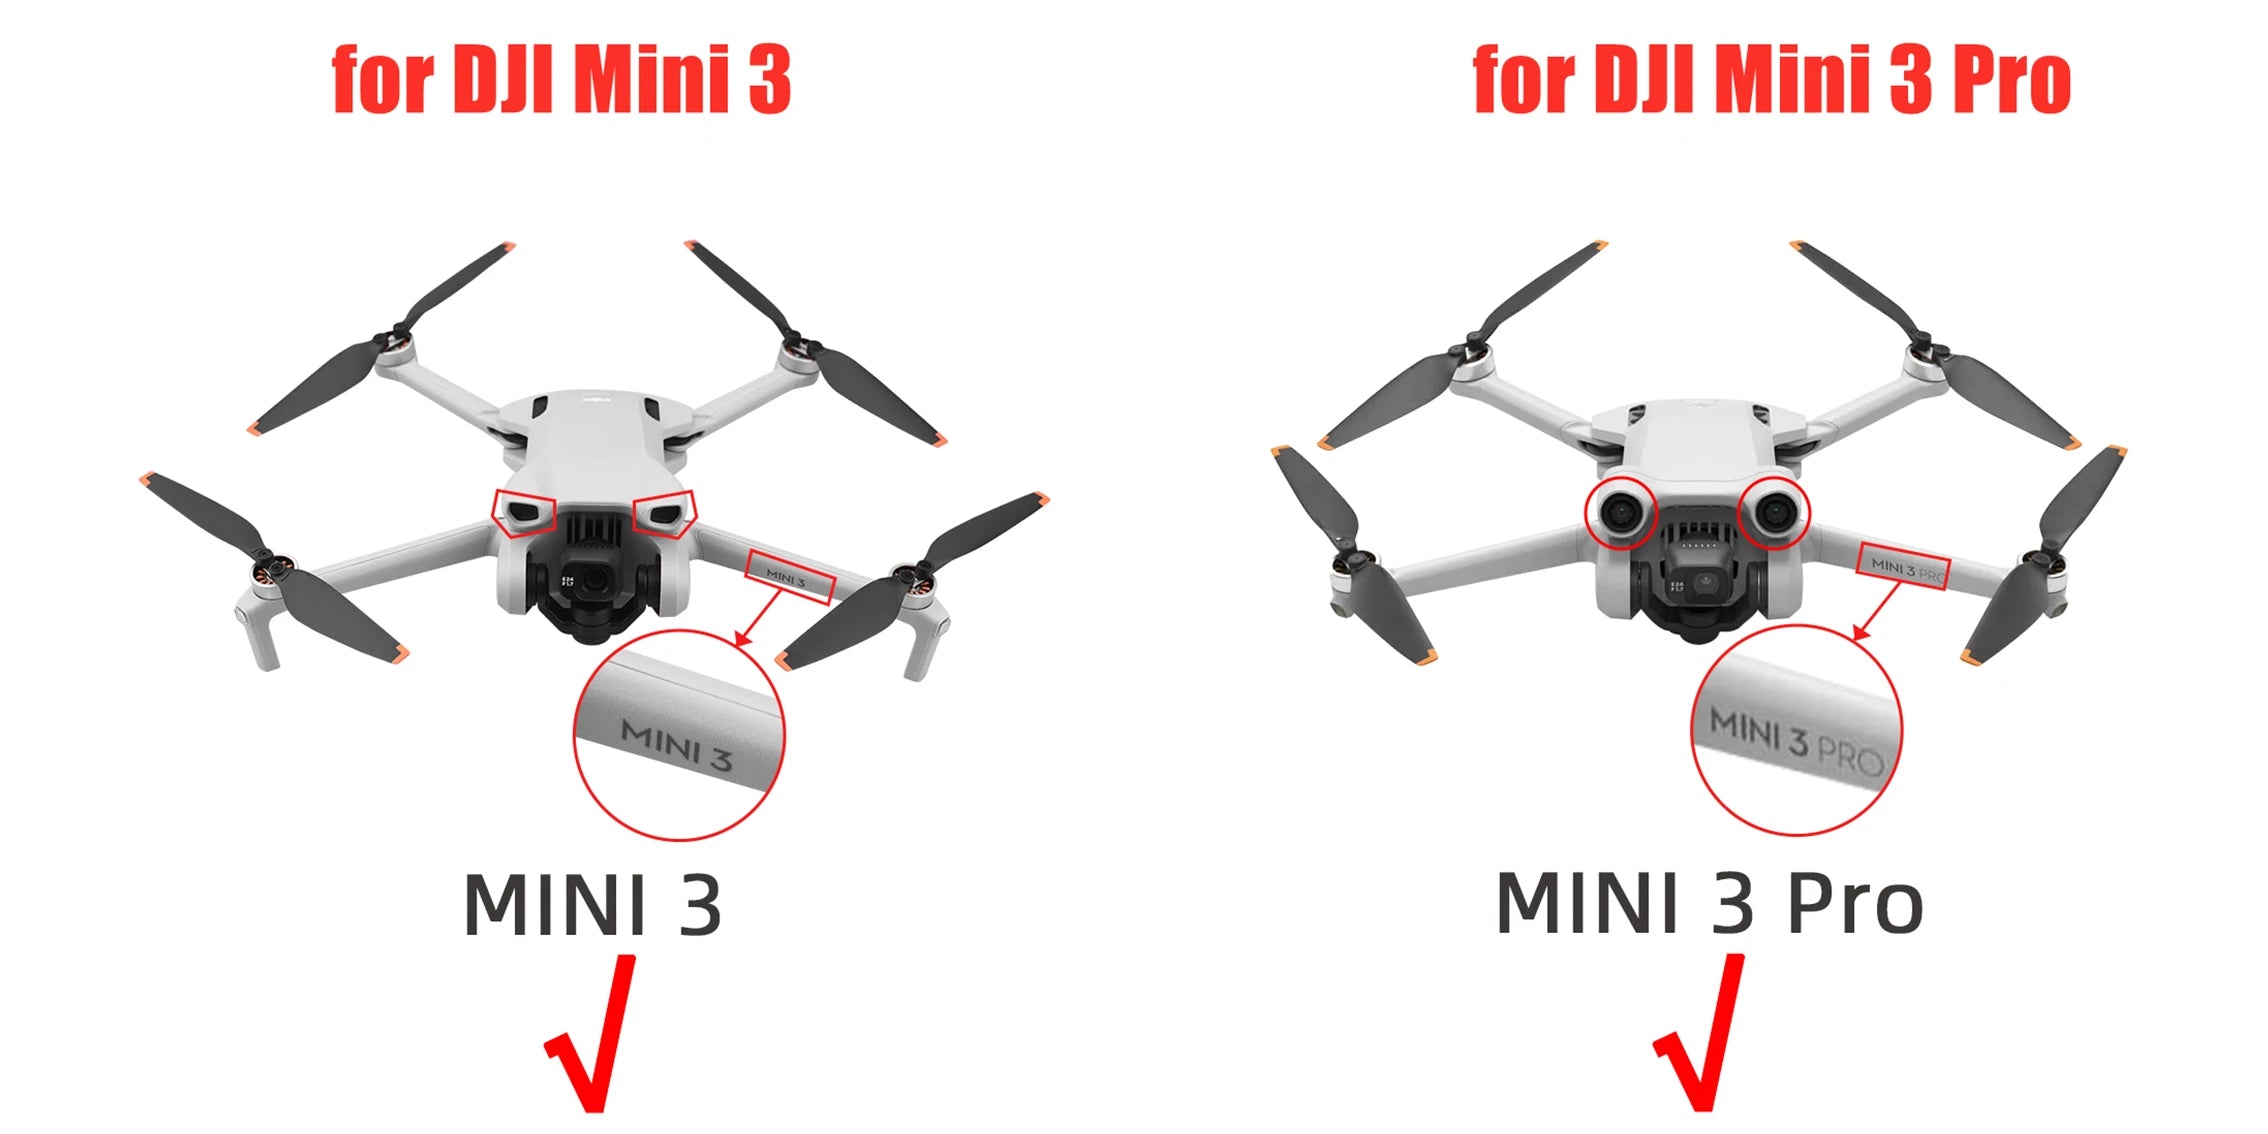 UV CPL ND8 Lens Filters For DJI MINI 3 PRO, the picture may not reflect the actual color of the item . please make sure you do not